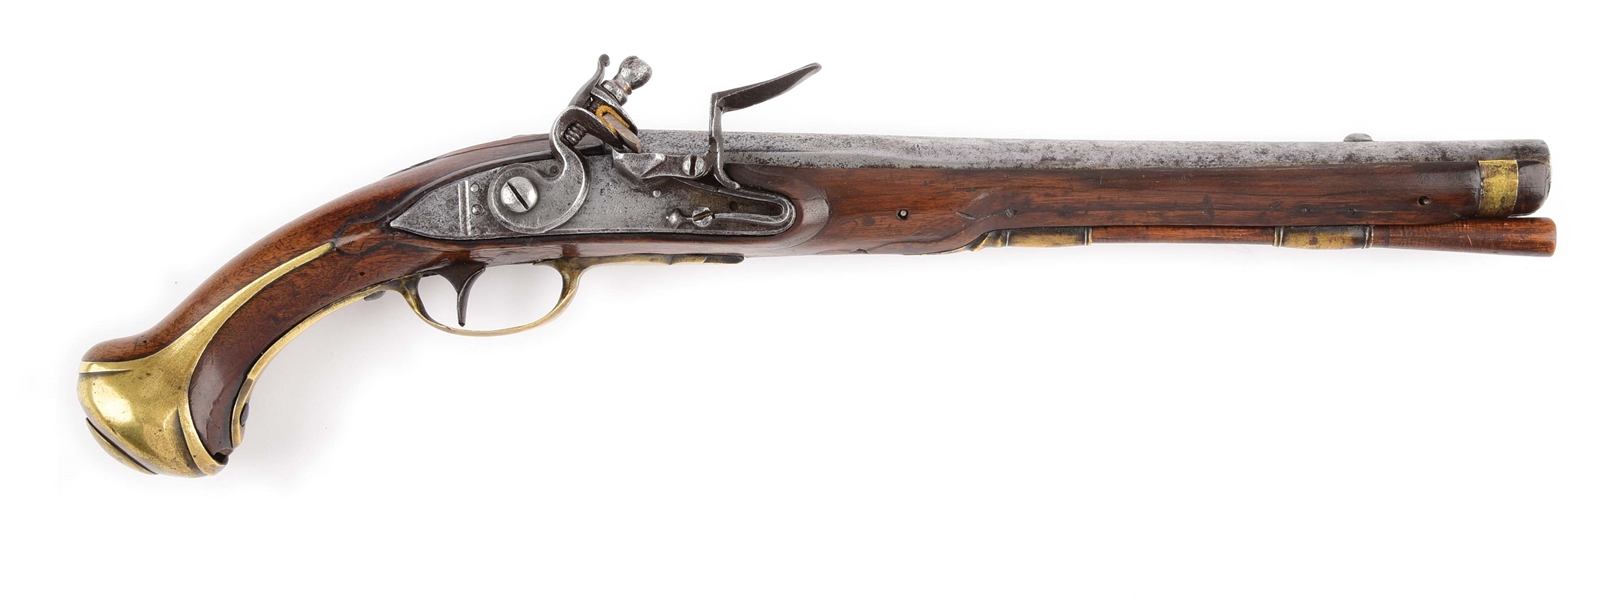 (A) RARE FRENCH MODEL 1733 CAVALRY OR DRAGOON PISTOL PRODUCED AT CHARLEVILLE.